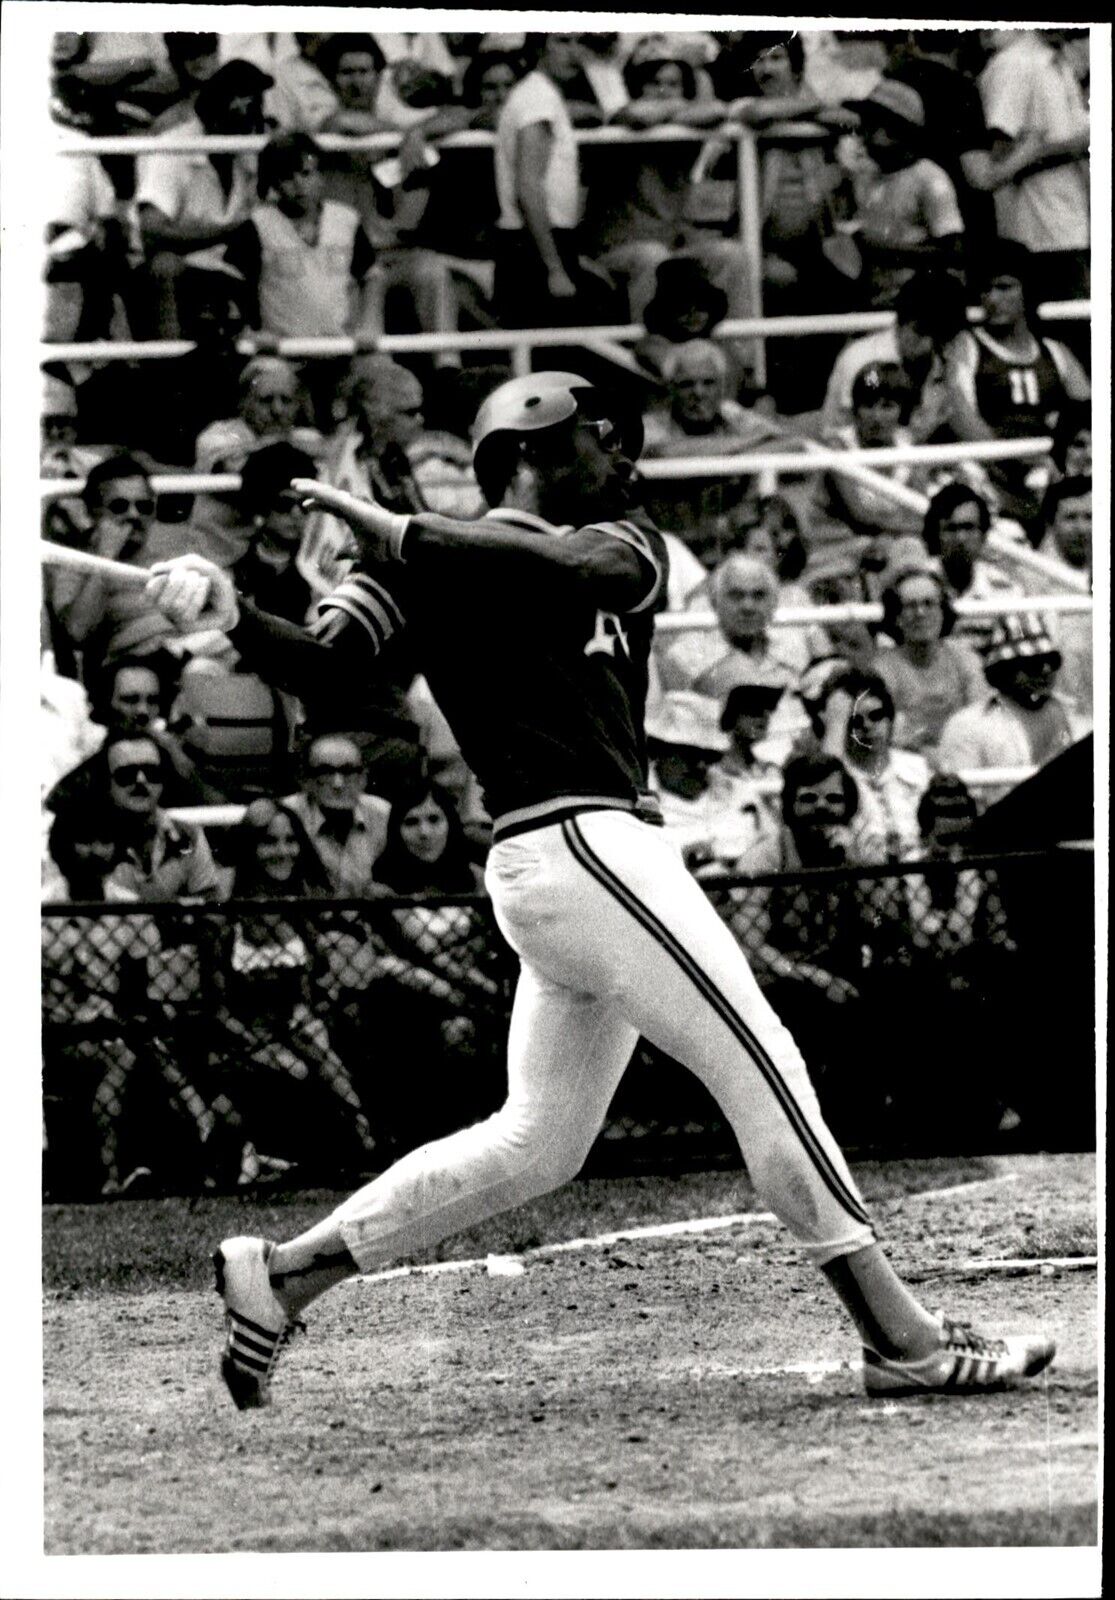 LD324 Orig Ronald Mrowiec Photo MITCHELL PAGE LEFT FIELDR 1977-83 OAKLAND A'S